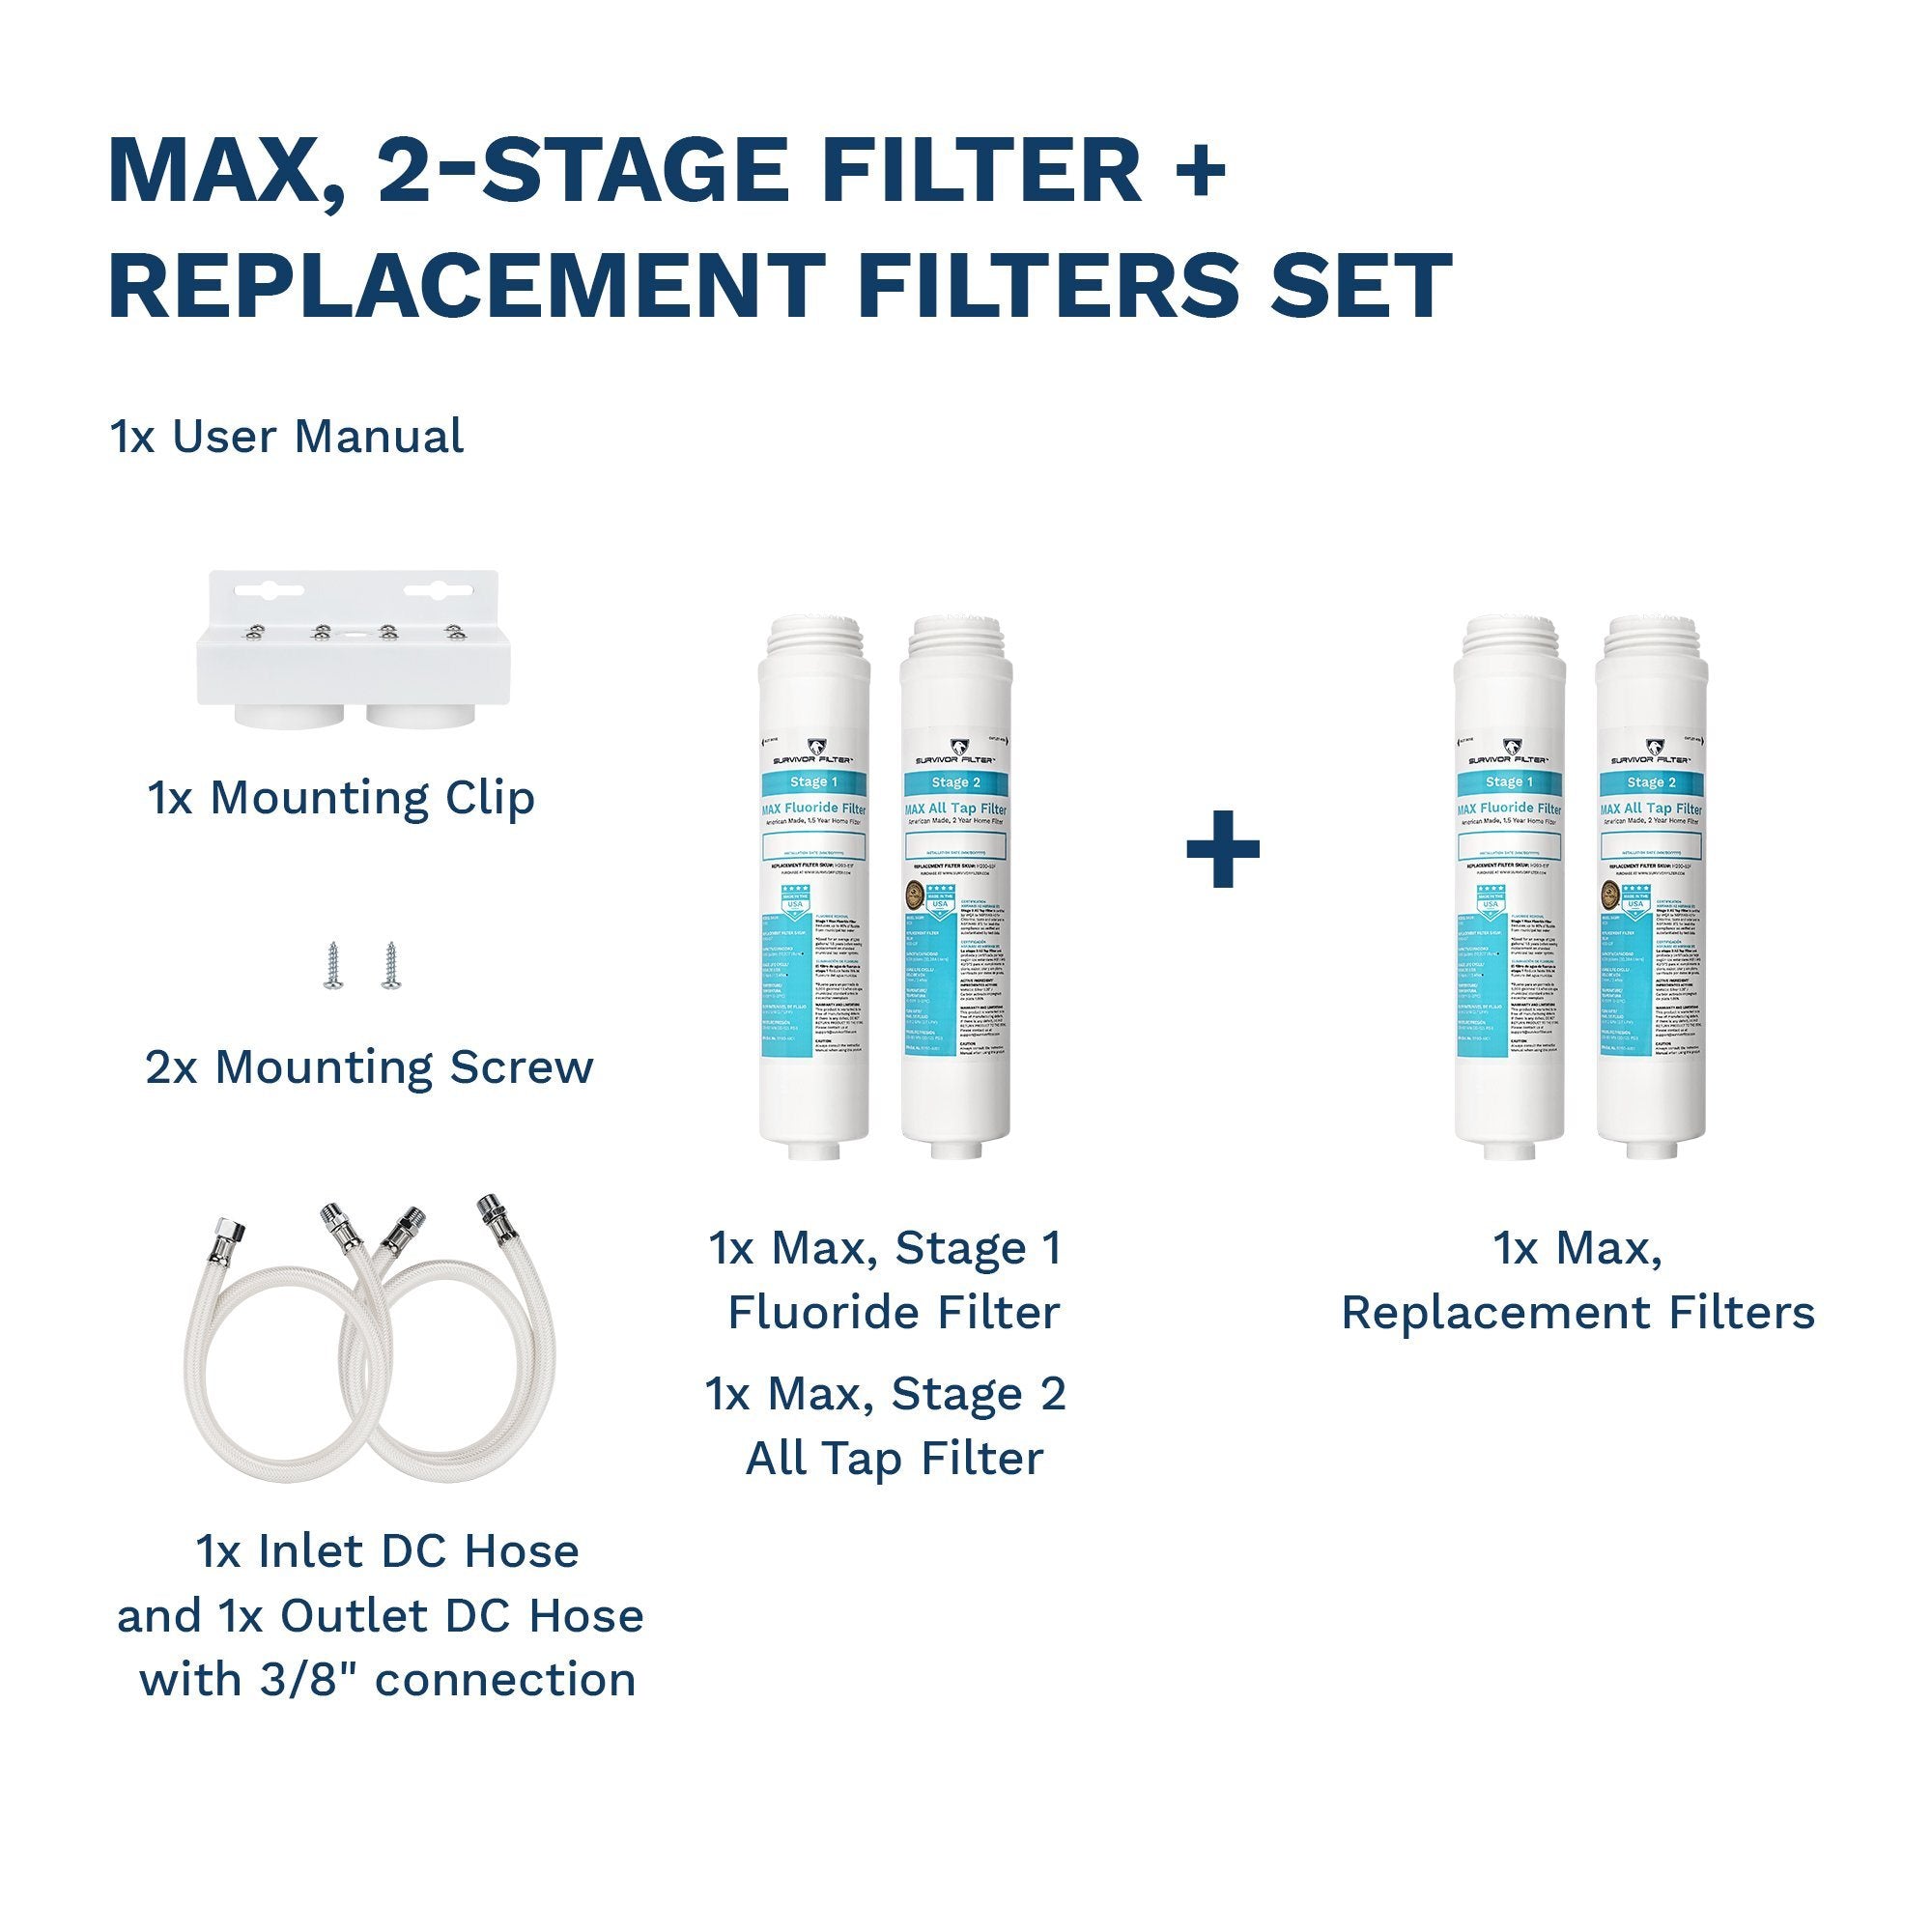 Max, 2-Stage Filter + Replacement Filters Set